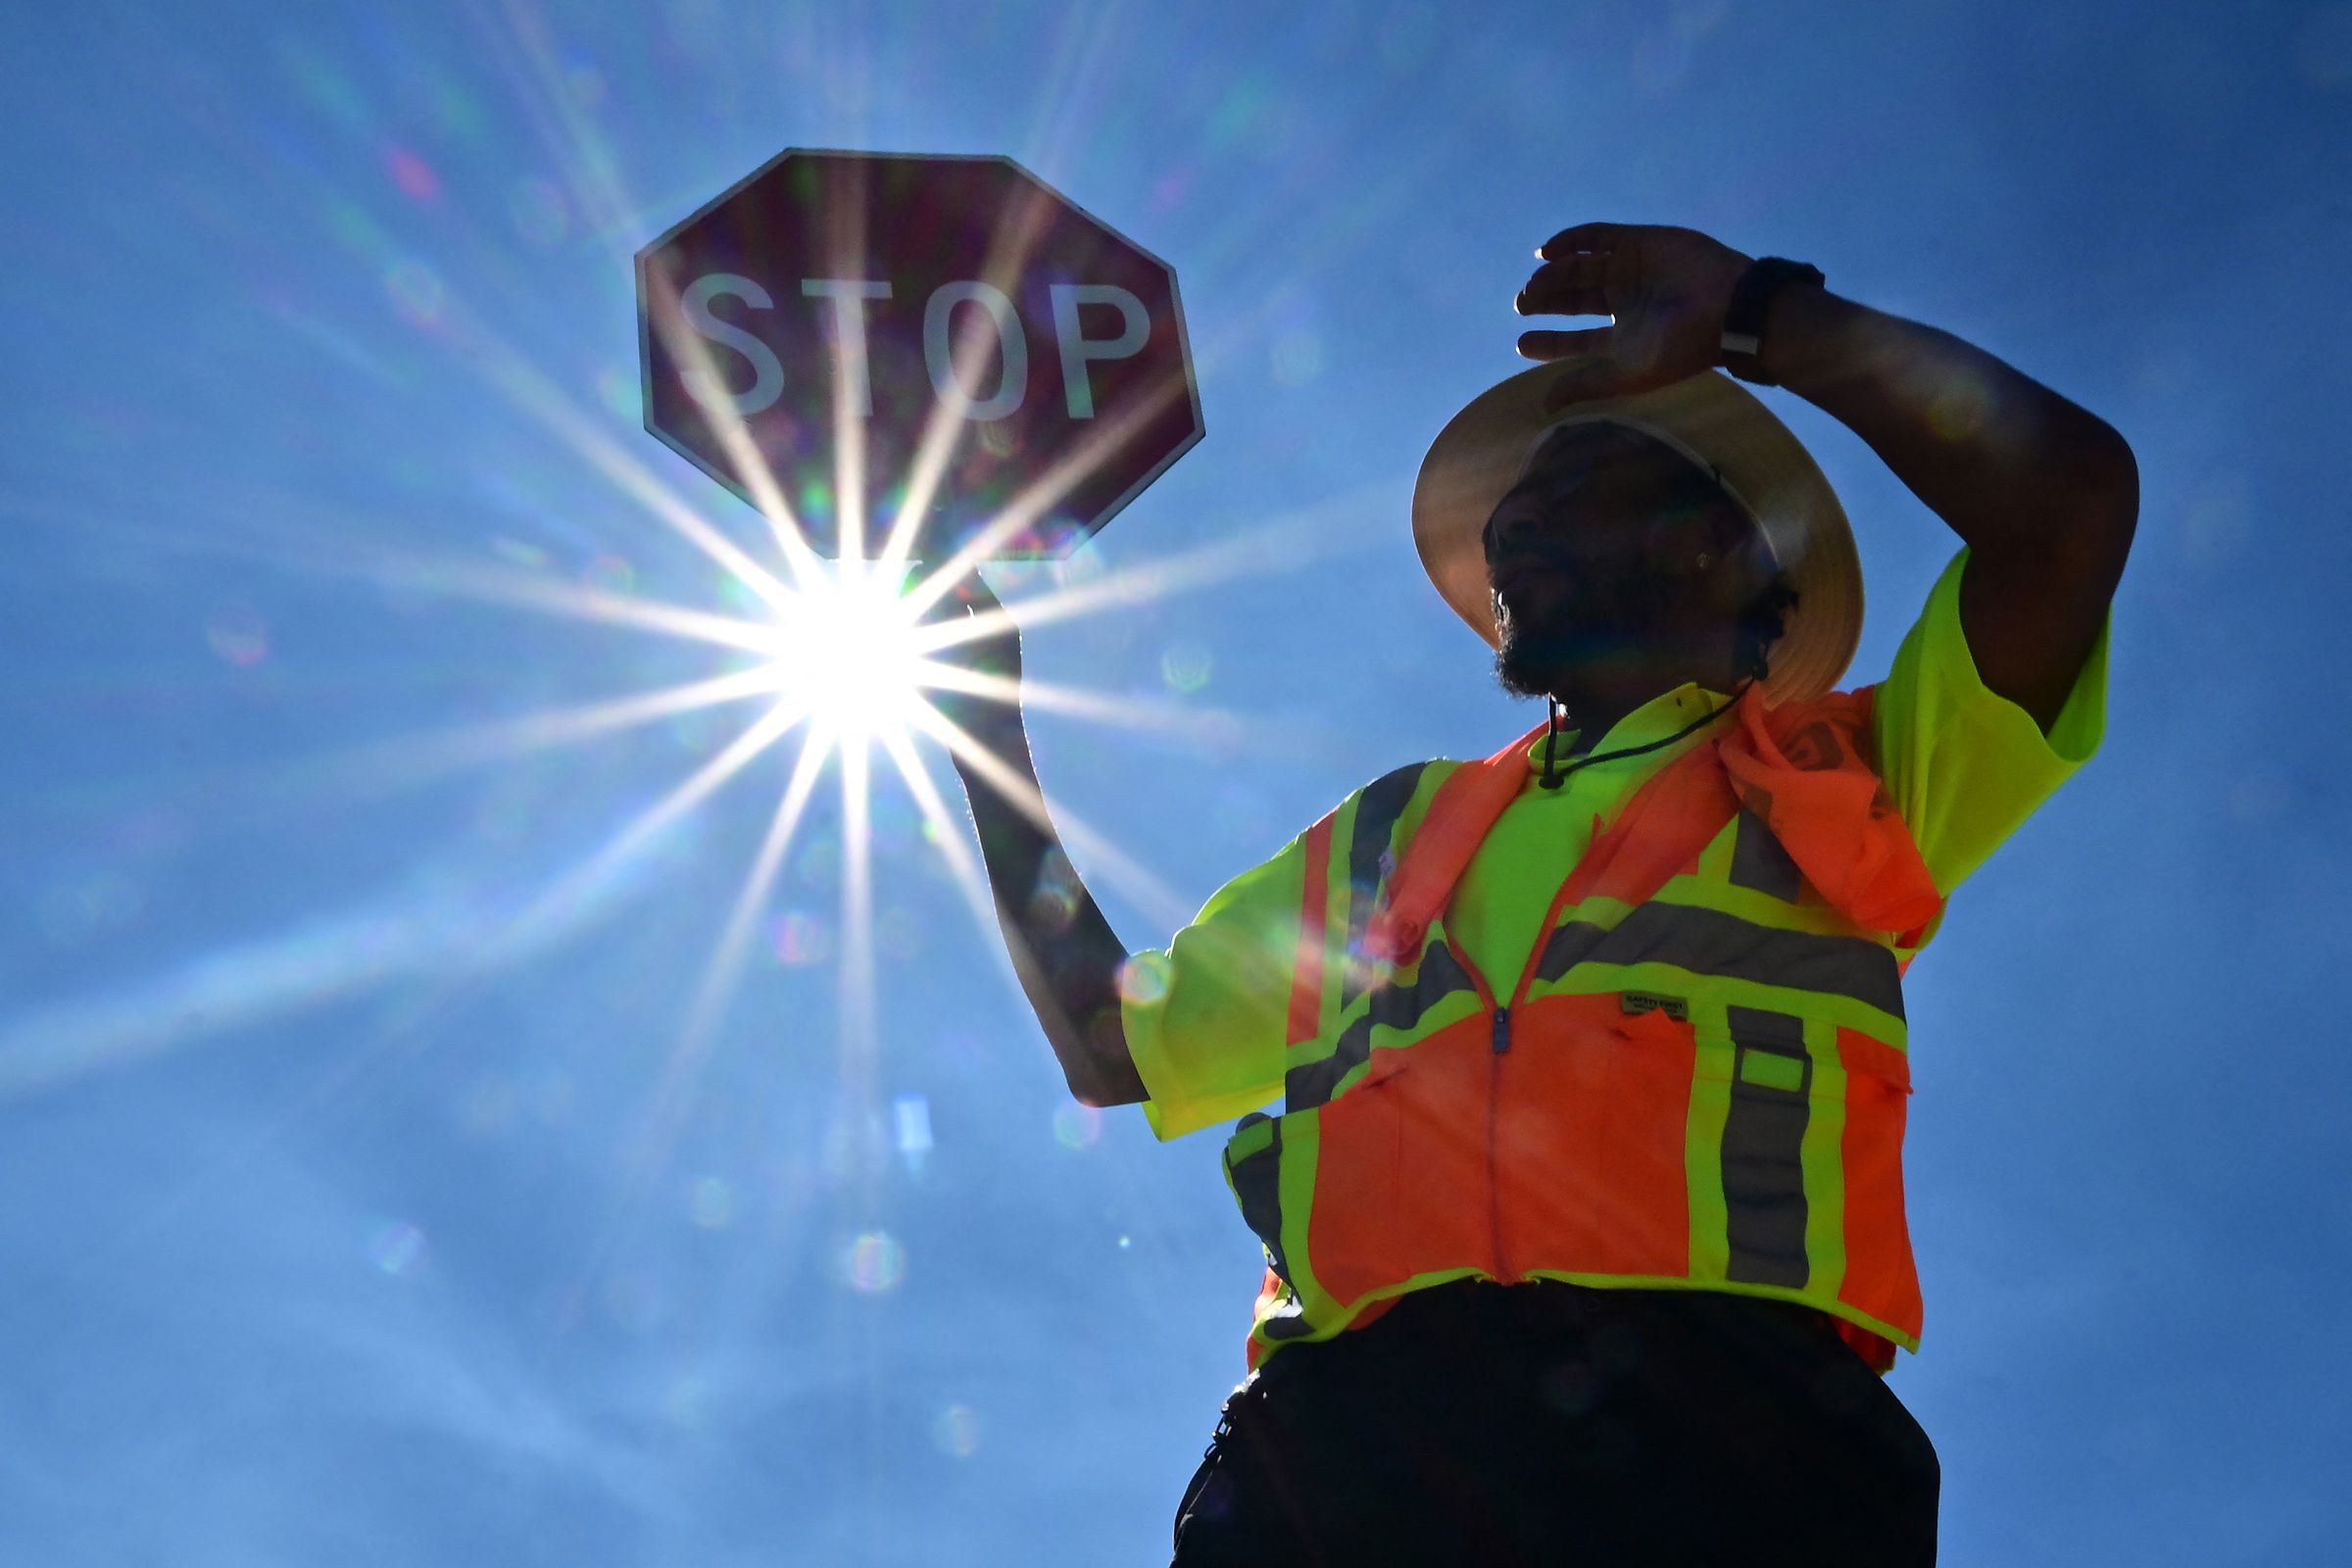 A person wearing an orange work vest holds up a stop sign. The sign shines brightly behind them.